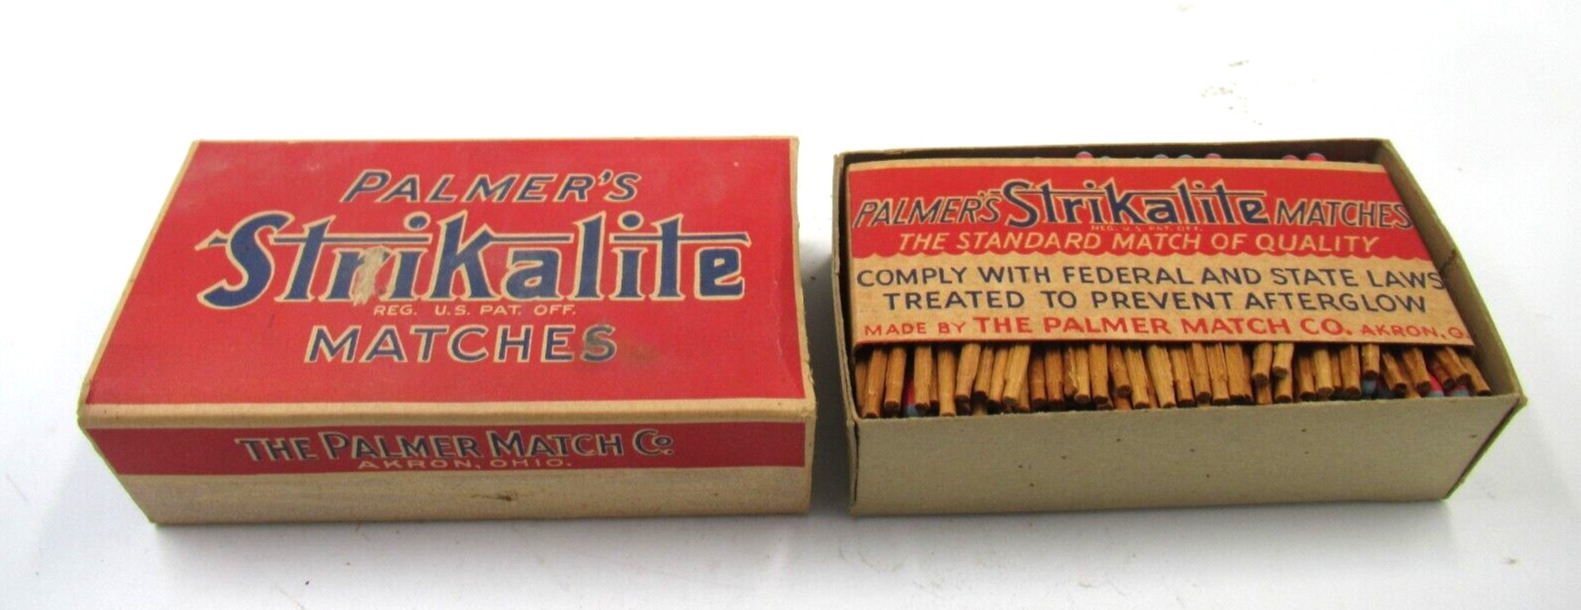 Vintage Palmer’s Strikalite wood double dip Matches in full unused original box.